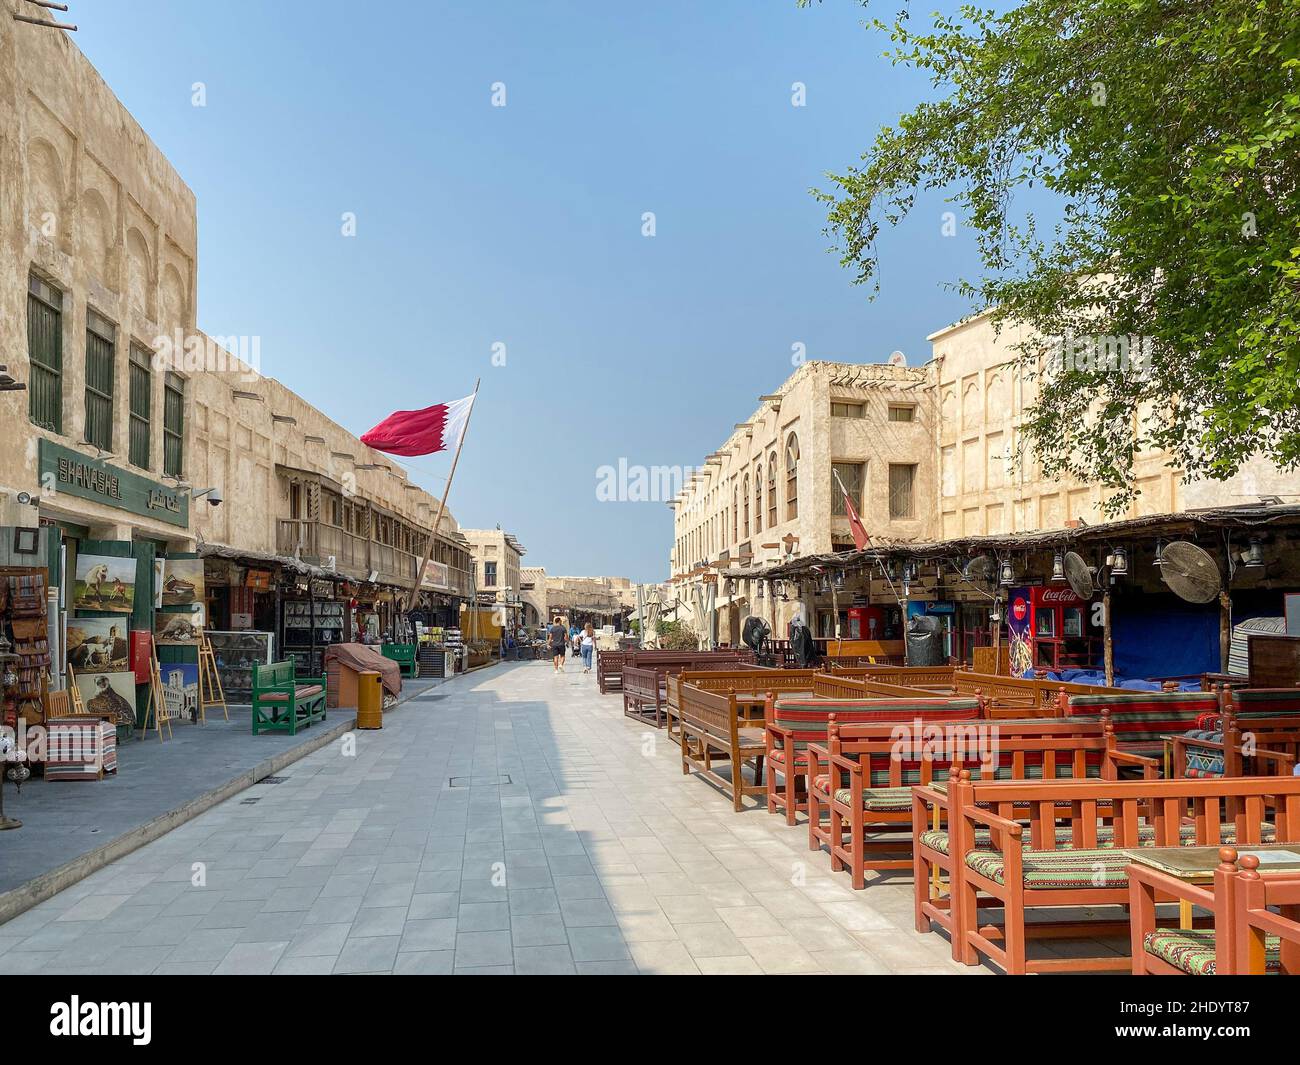 Doha, Qatar – October 5, 2019: Old town Souq Waqif with Qatari flag against blue sky Stock Photo